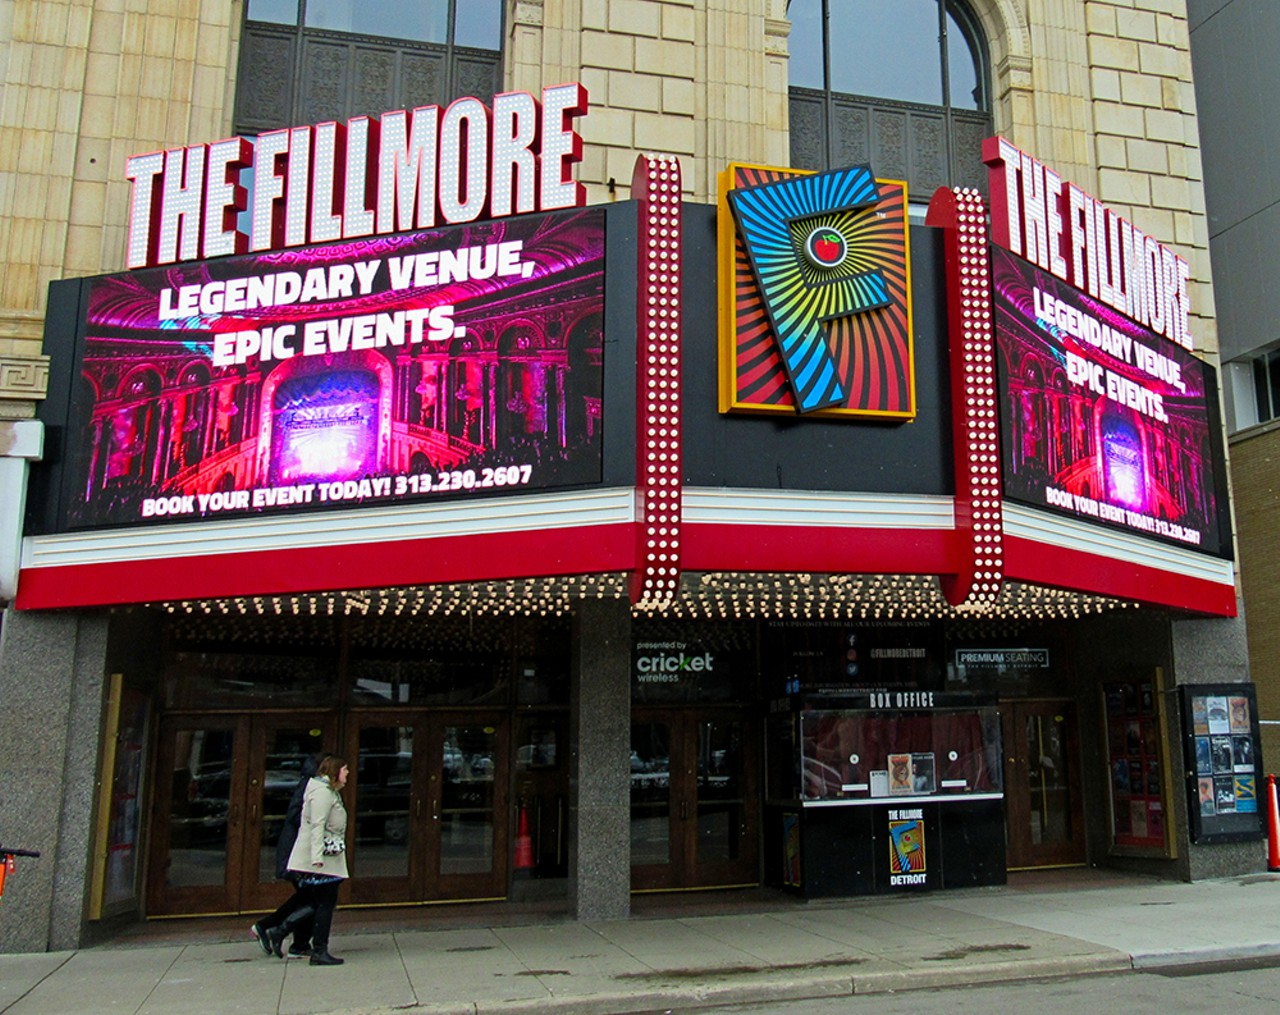 The Fillmore Detroit
2115 Woodward Ave., Detroit; 313-961-5451; livenation.com
The Fillmore was previously known as the State Theatre, but it was rebranded as the Fillmore Detroit in 2007 in honor of the Fillmore in San Francisco. It has a capacity of 2,900.